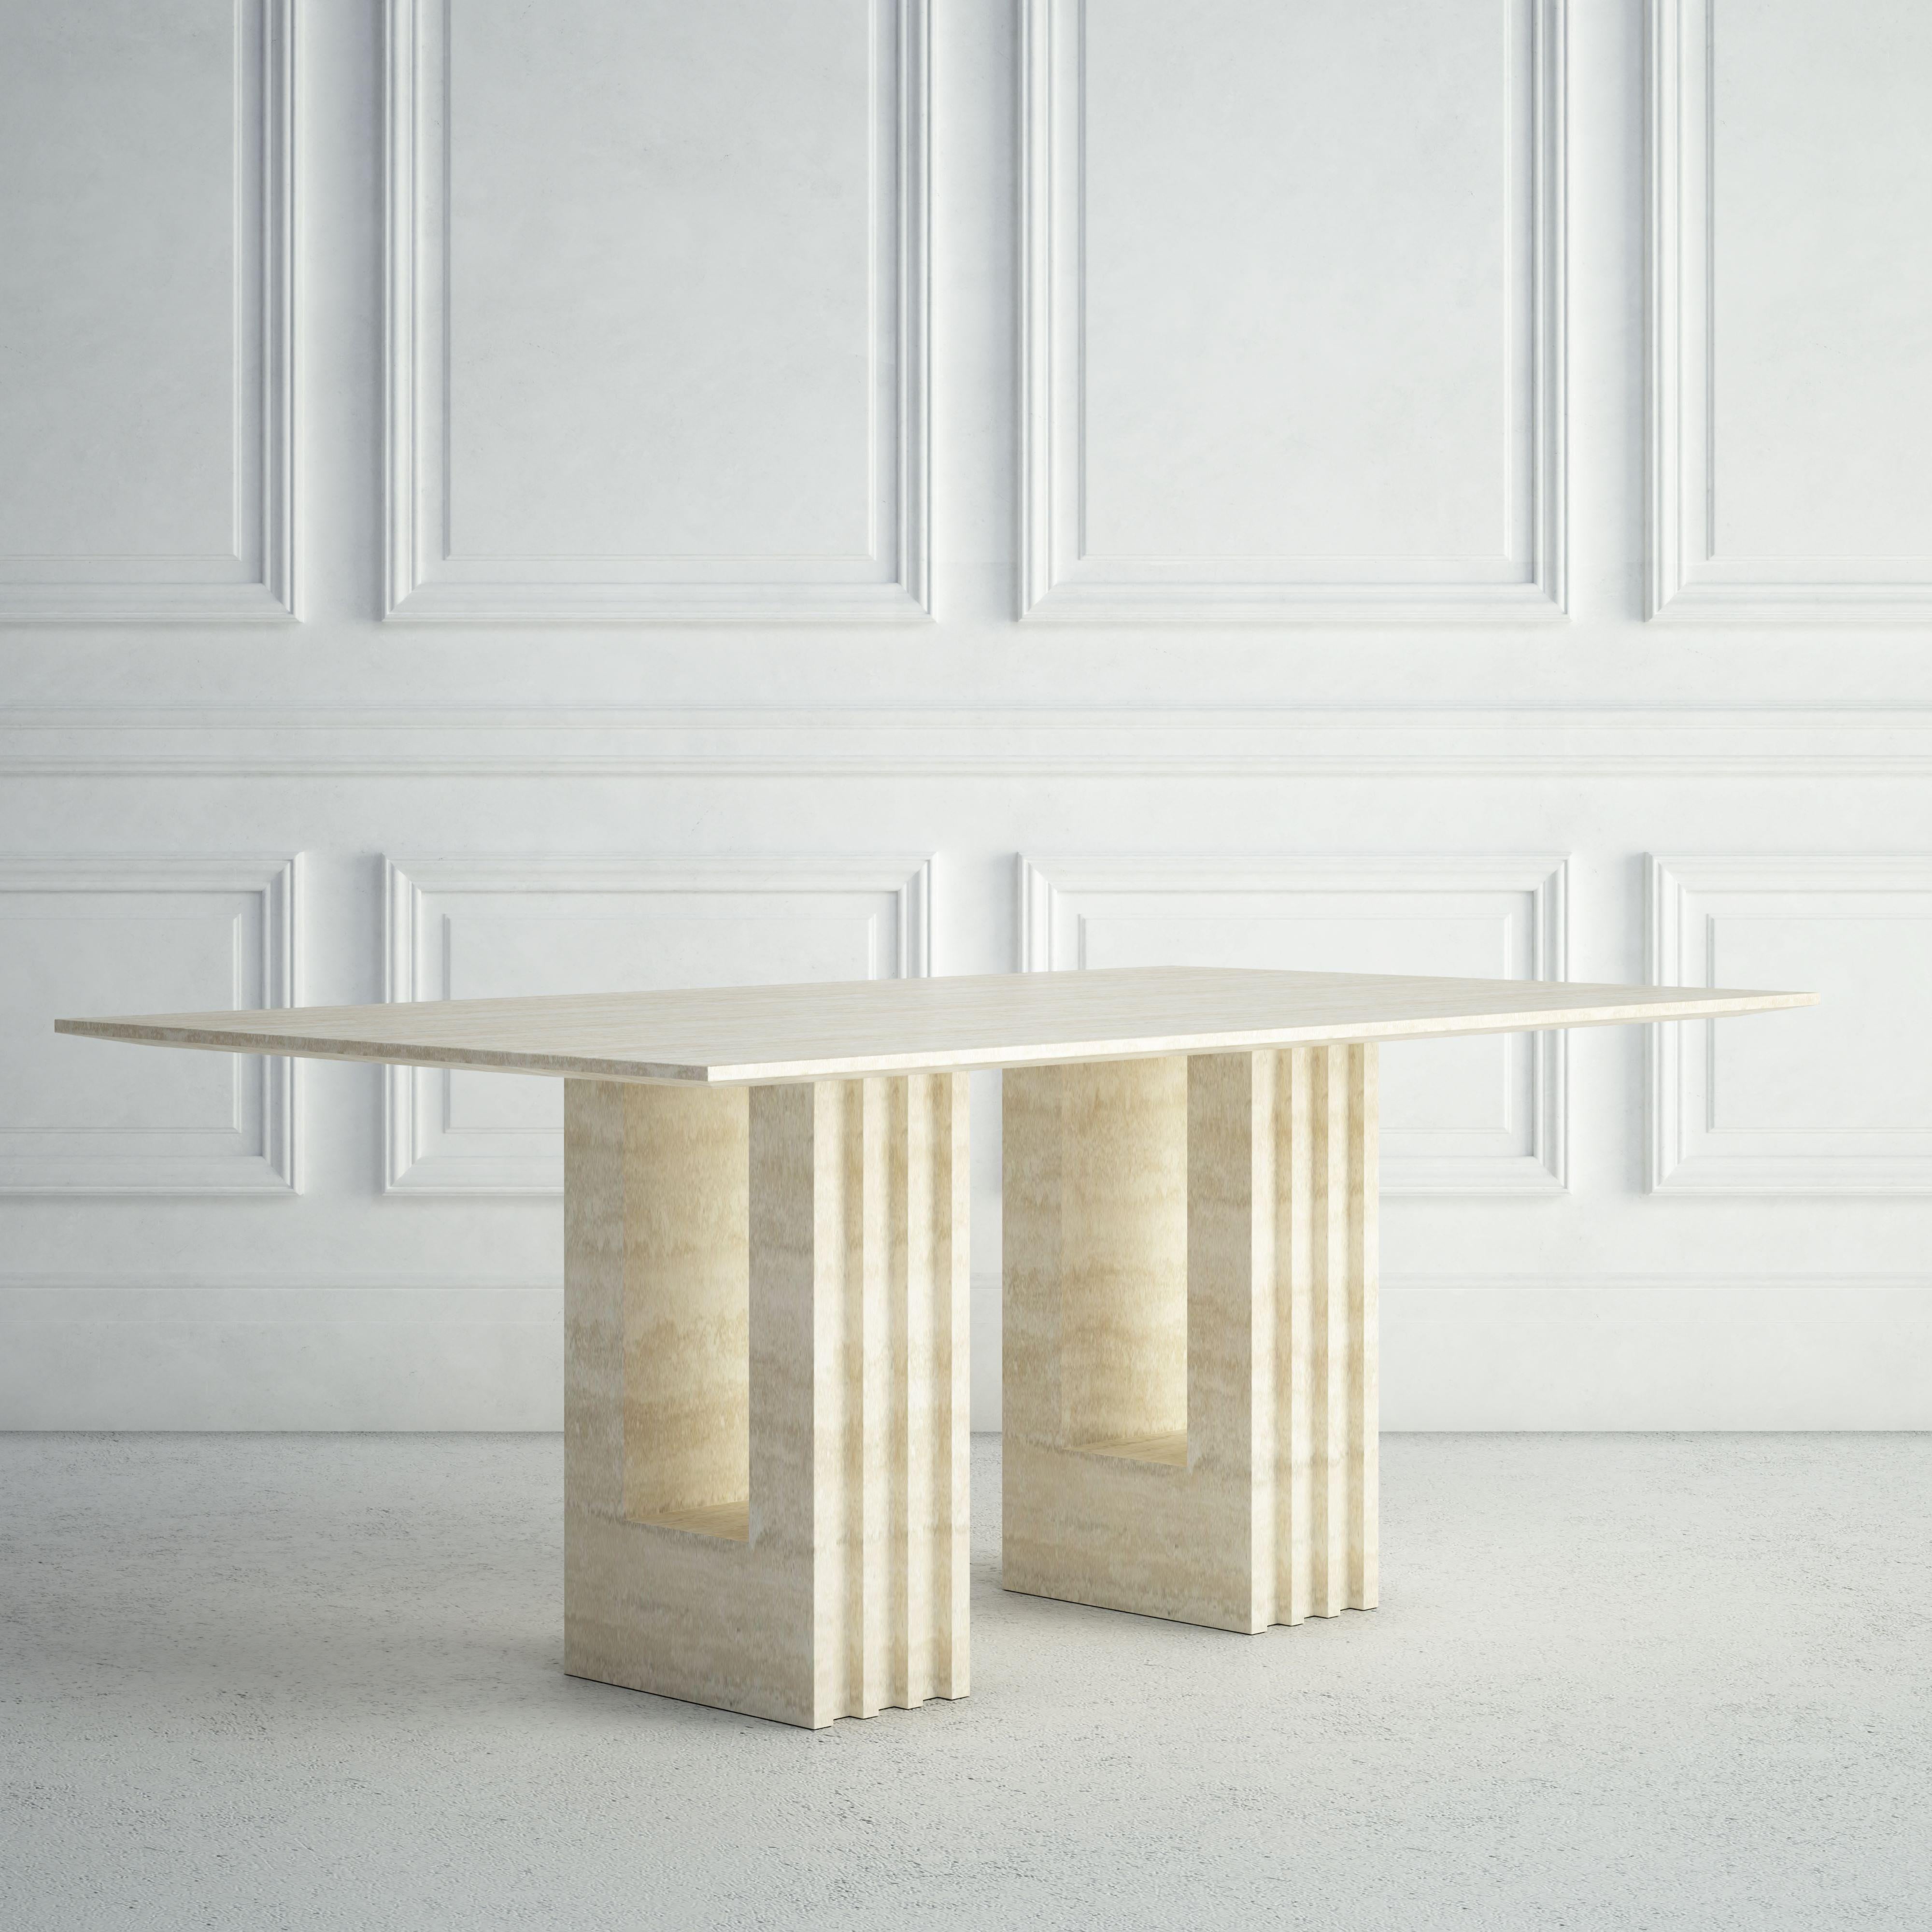 American The Madeleine: A Modern Stone Dining Table with a Rectangular Top and Bases For Sale